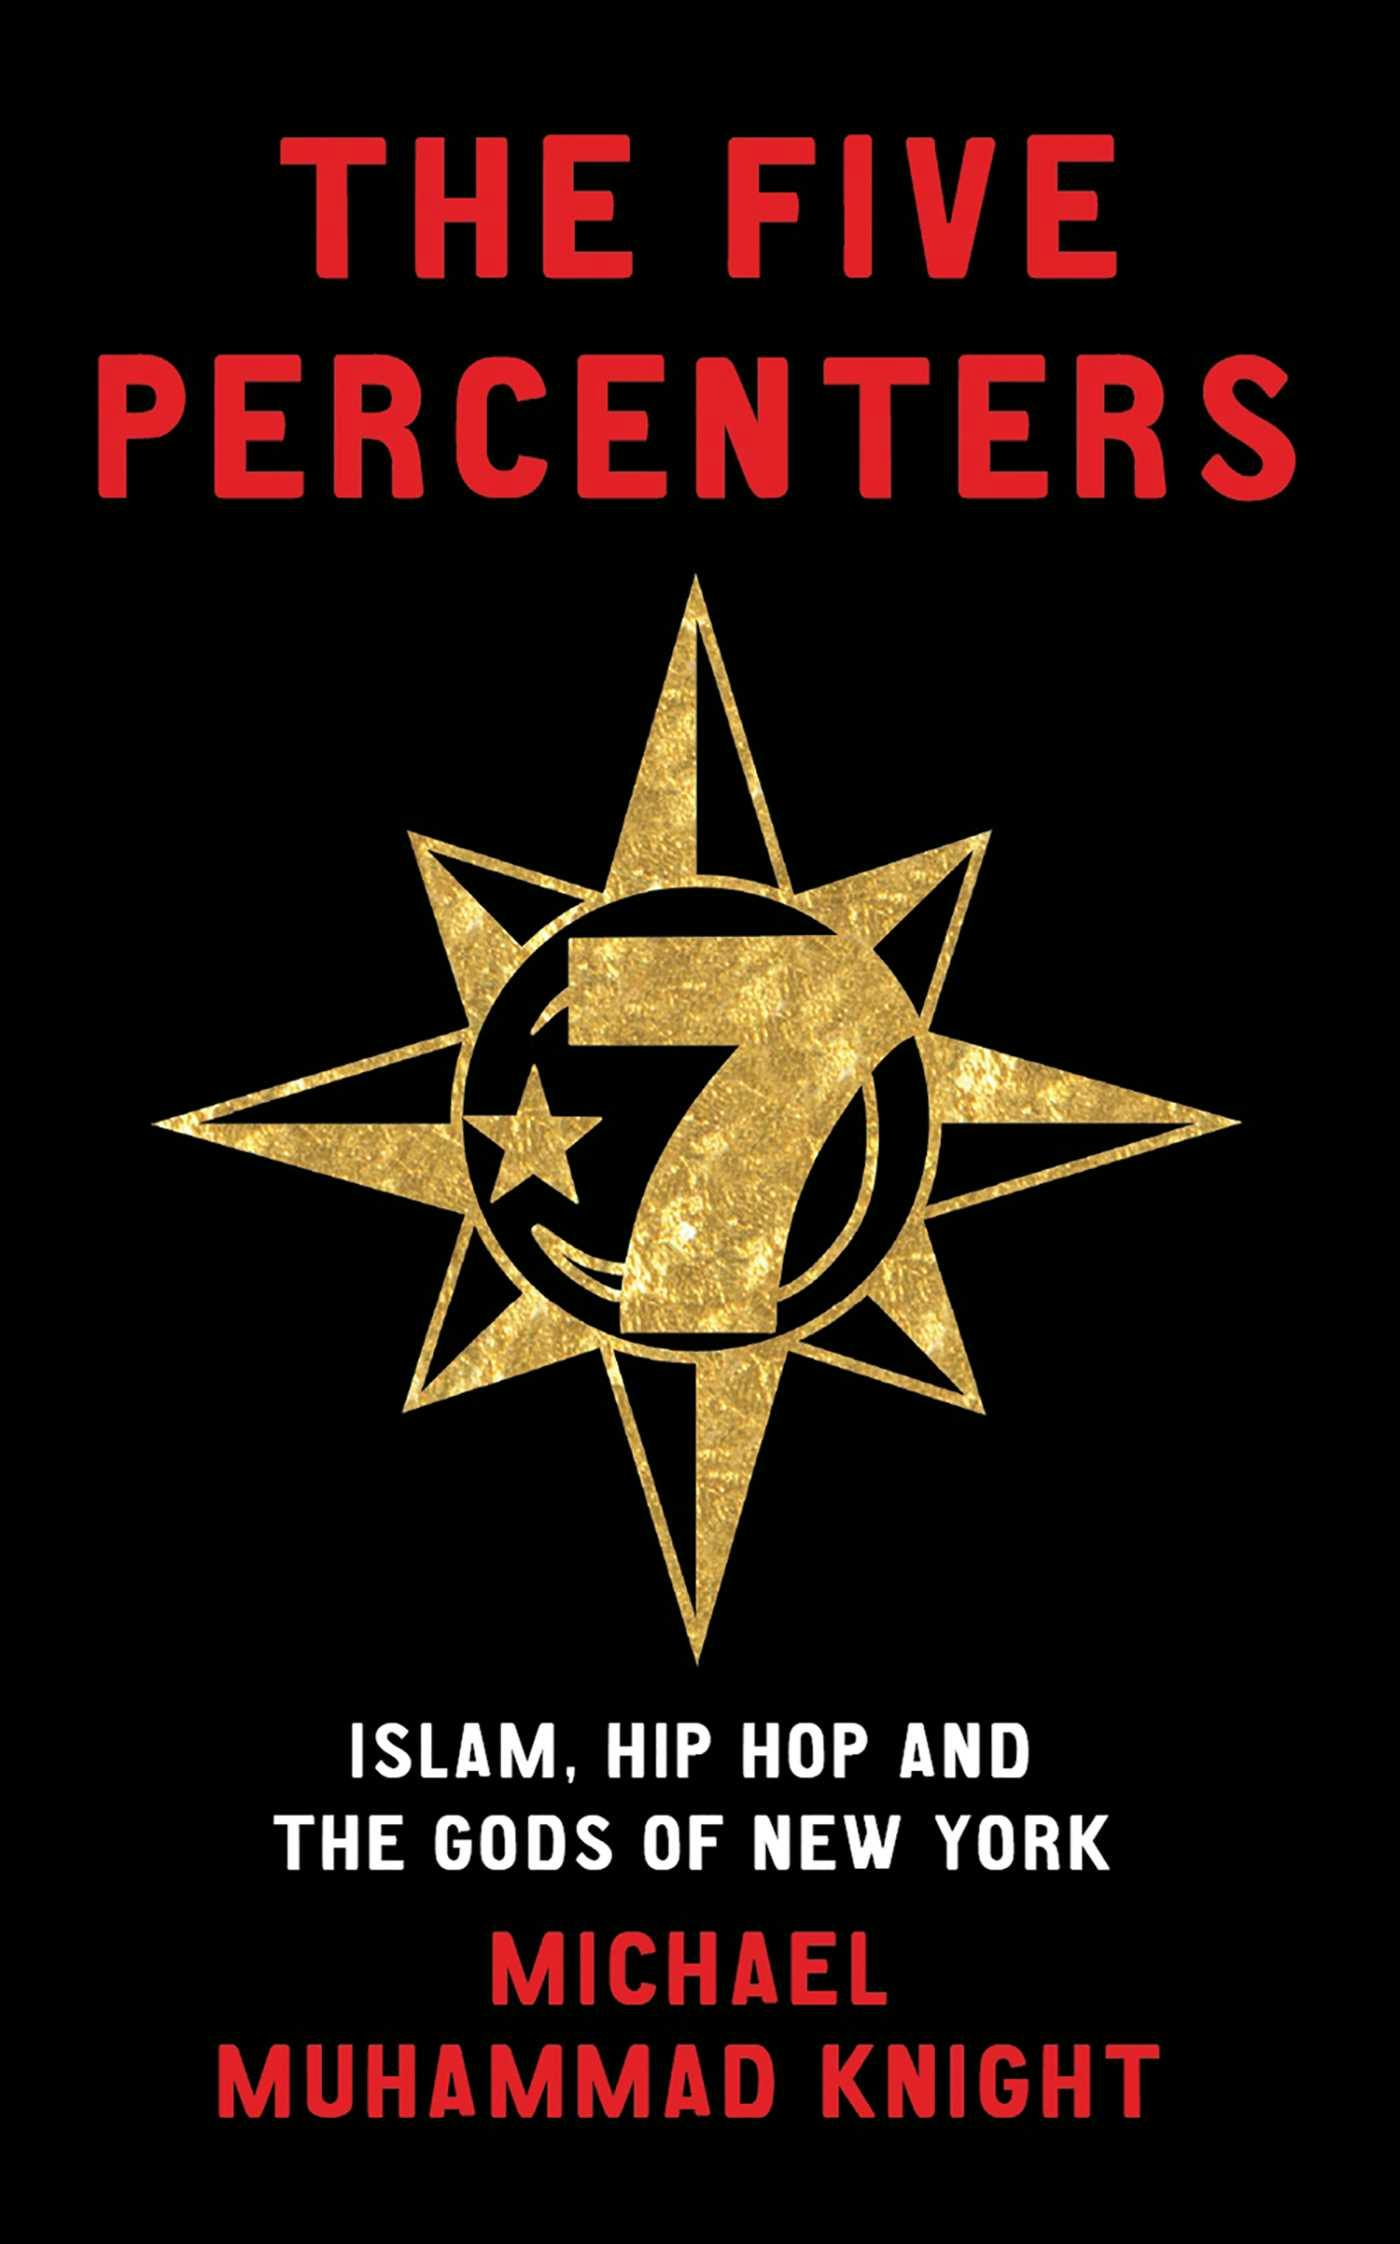 The Five Percenters: Islam, Hip-hop and the Gods of New York - Michael Muhammad Knight